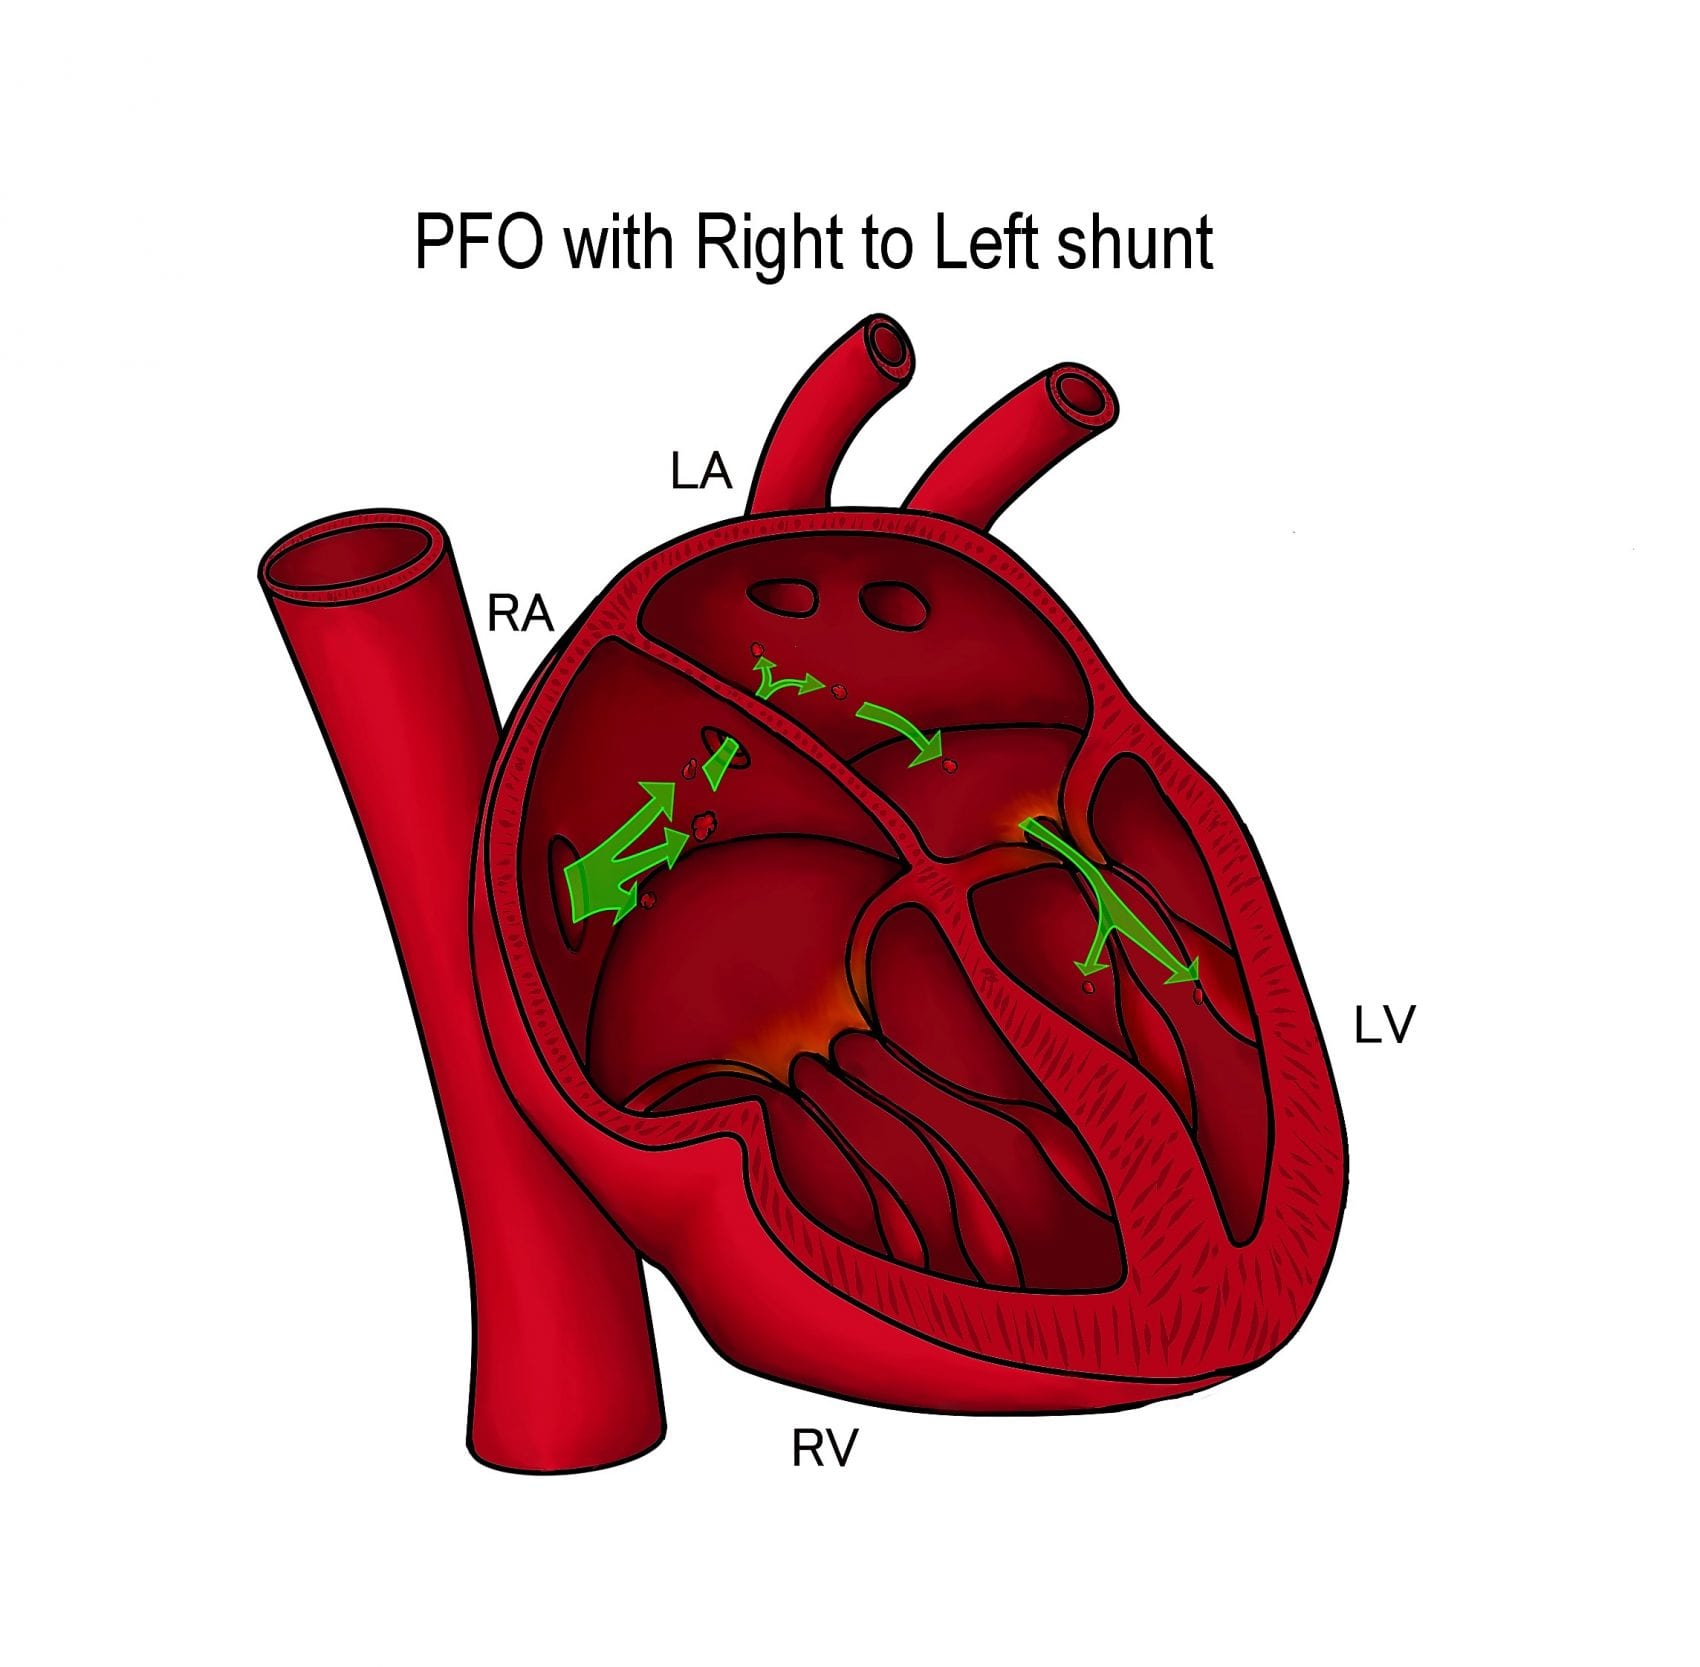 Heart diagram showing PFO with right to left shunt